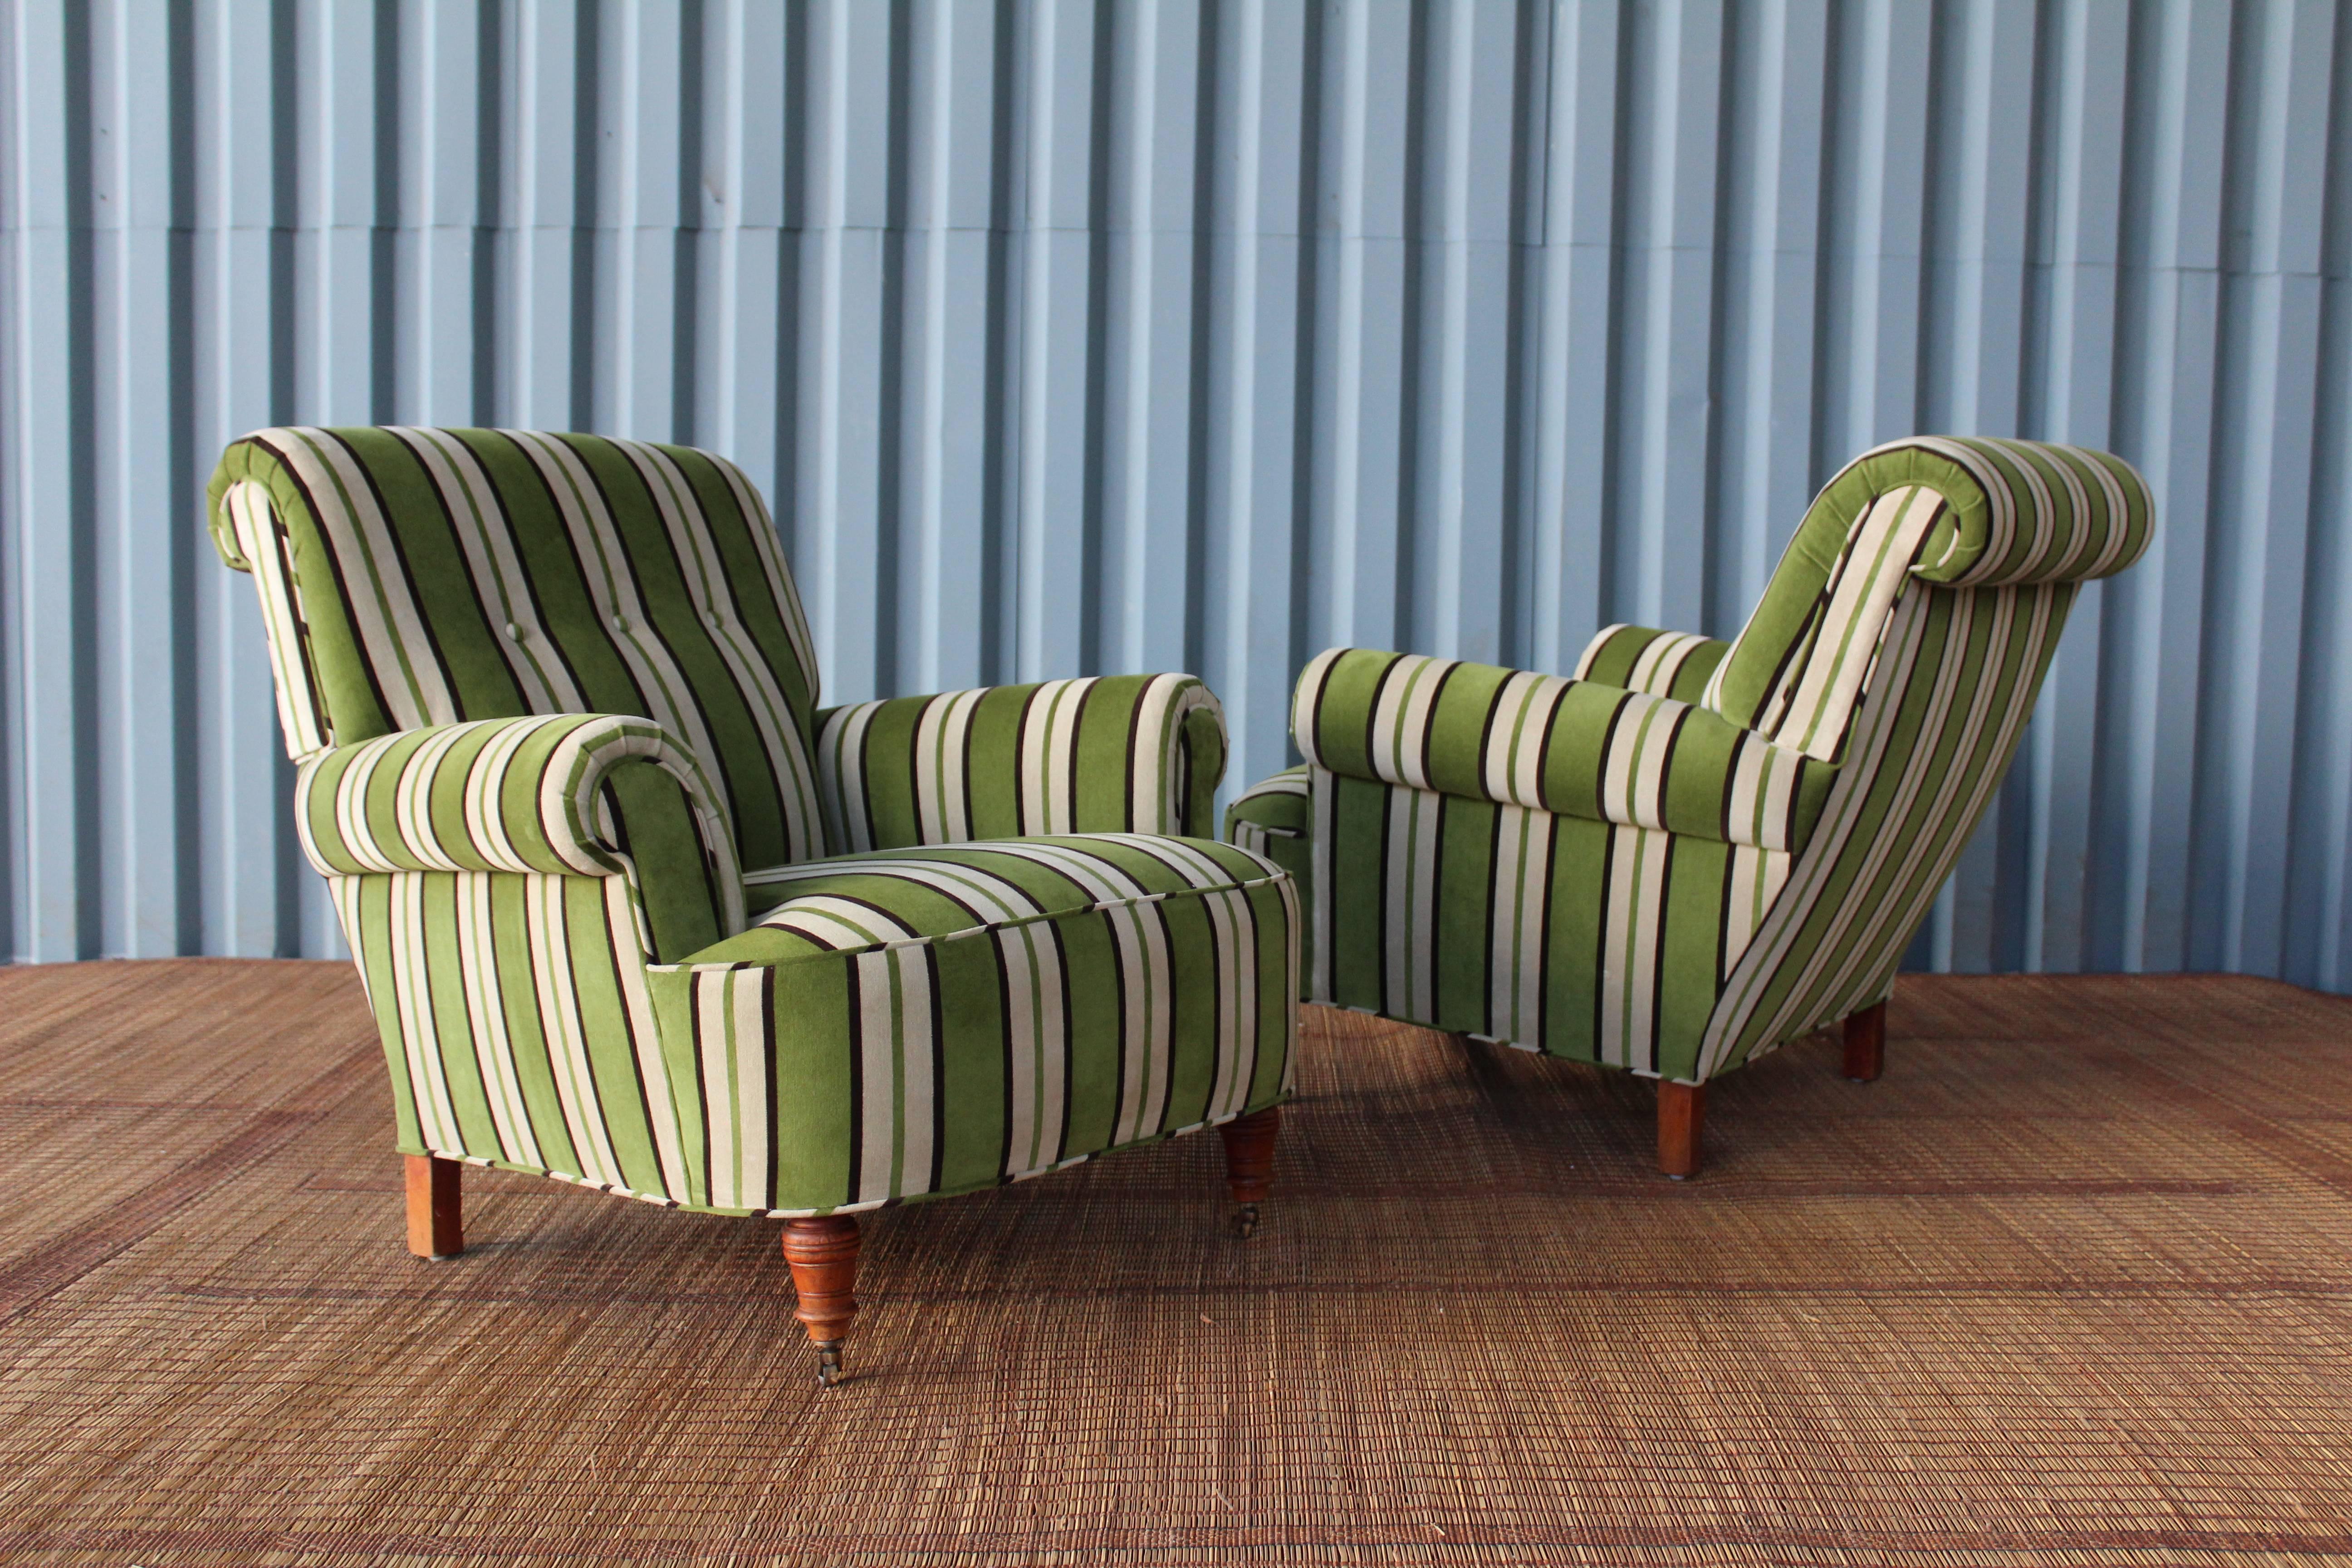 Pair of 1940s traditional armchairs. Recently upholstered in a luxurious green velvet striped fabric. Refurnished with new rolling casters on the front of each chair.